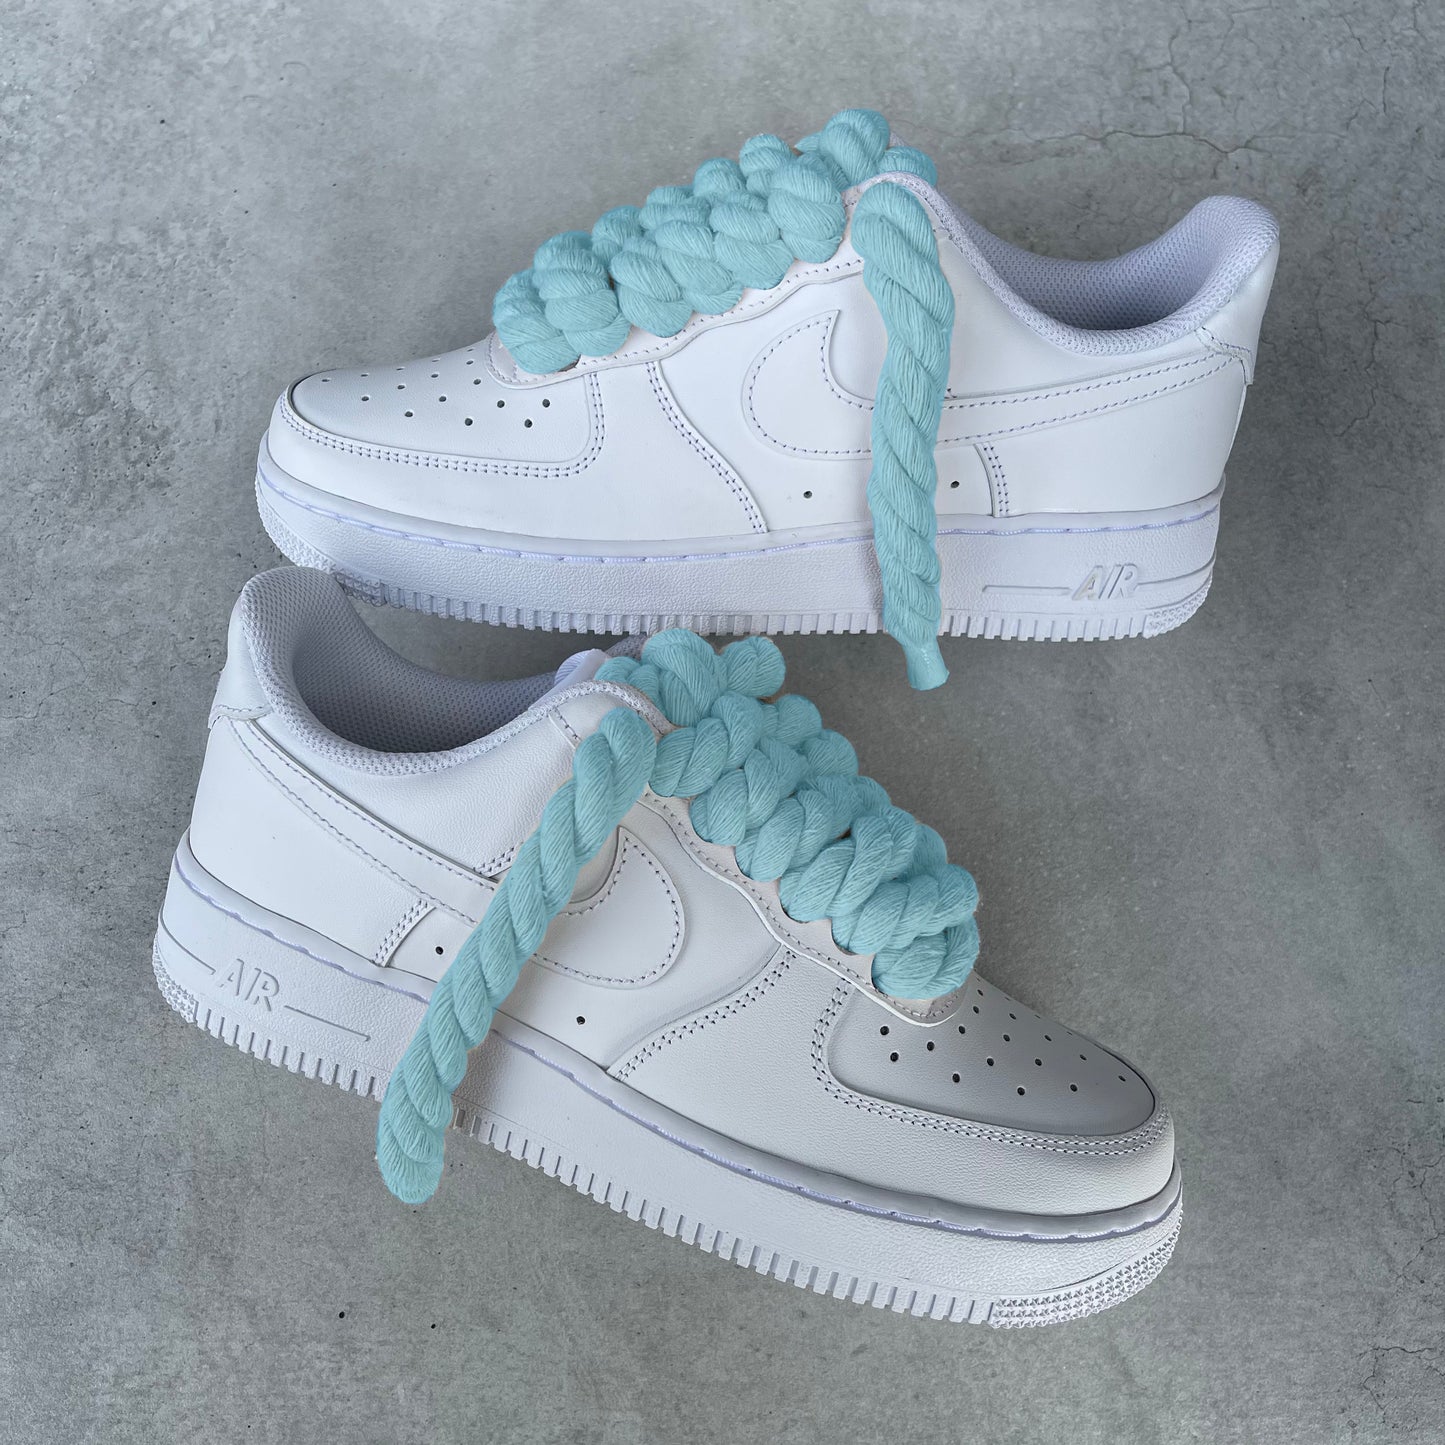 Copy of Custom AIR FORCE 1 - Rope laces (blue)